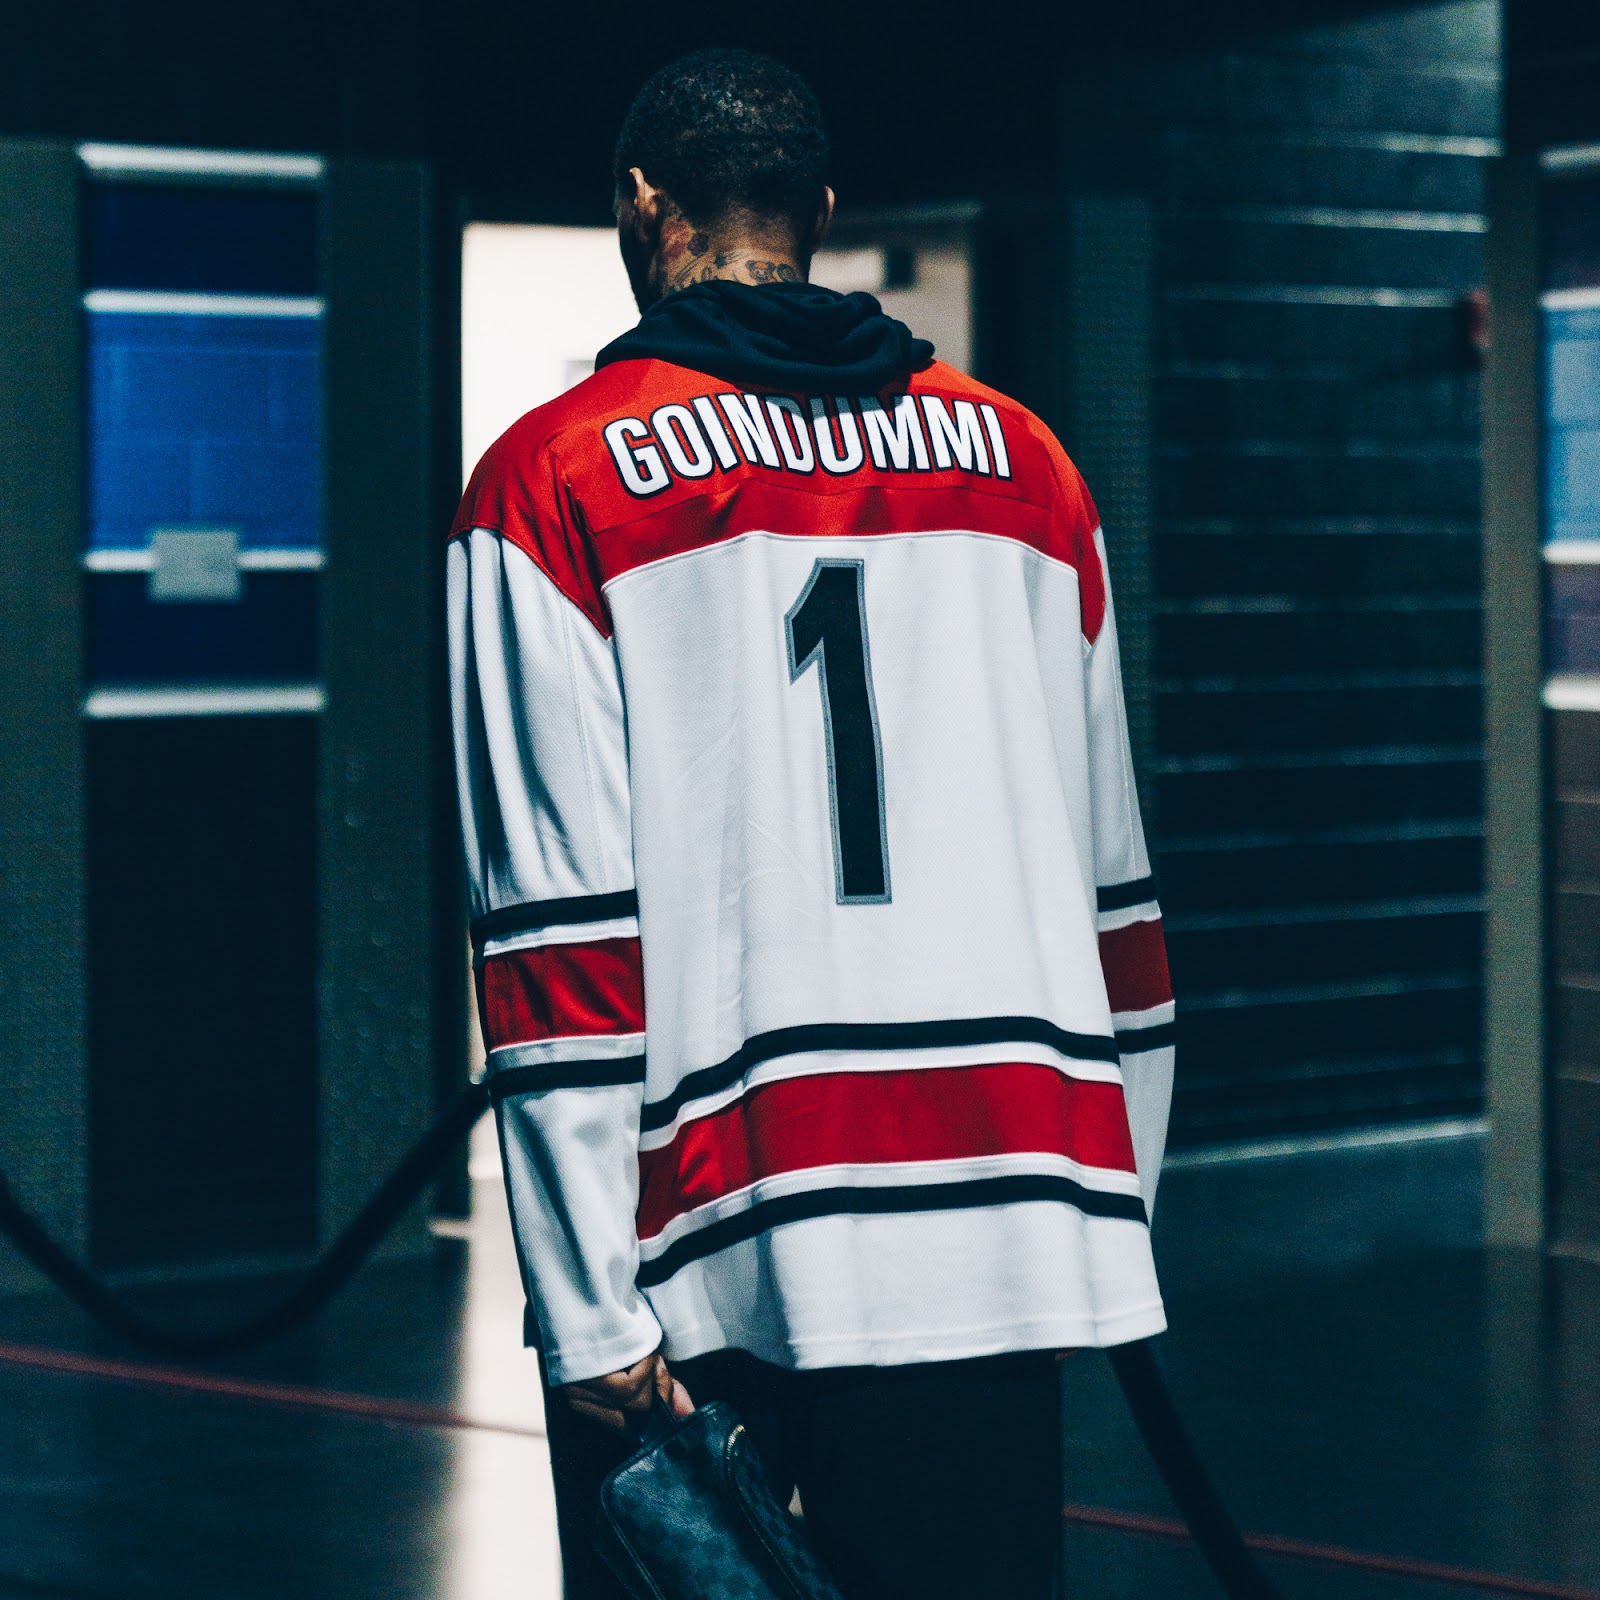 put your name on a hockey jersey